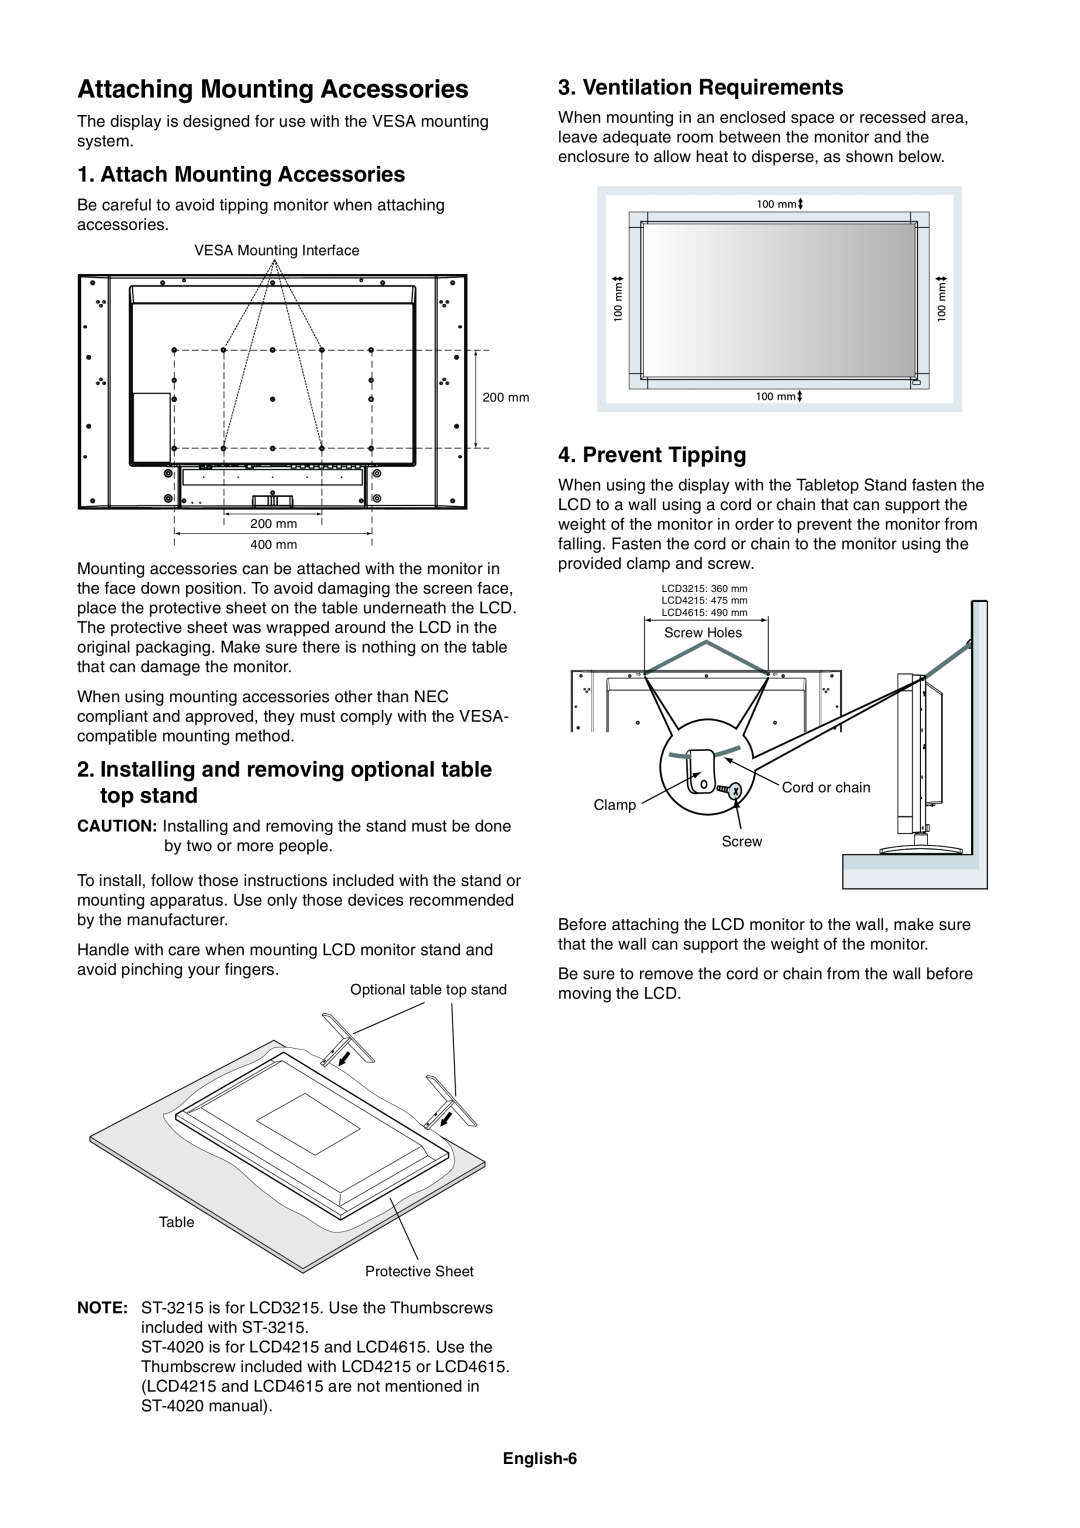 NEC LCD4615 Attaching Mounting Accessories, Attach Mounting Accessories, Installing and removing optional table top stand 